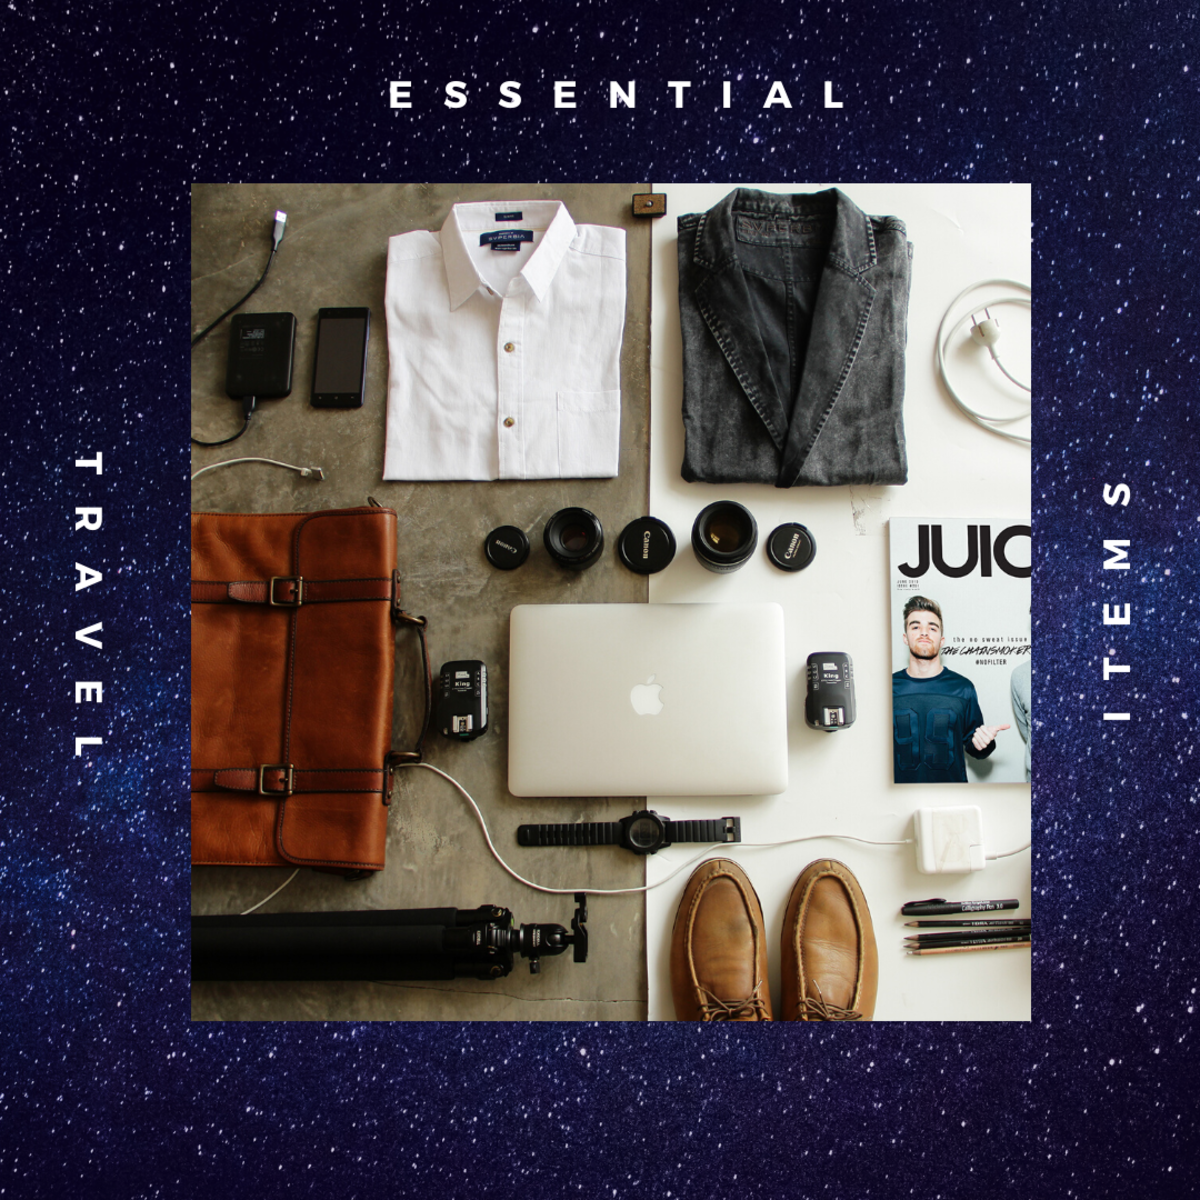 The Ultimate List of Essential Travel Items